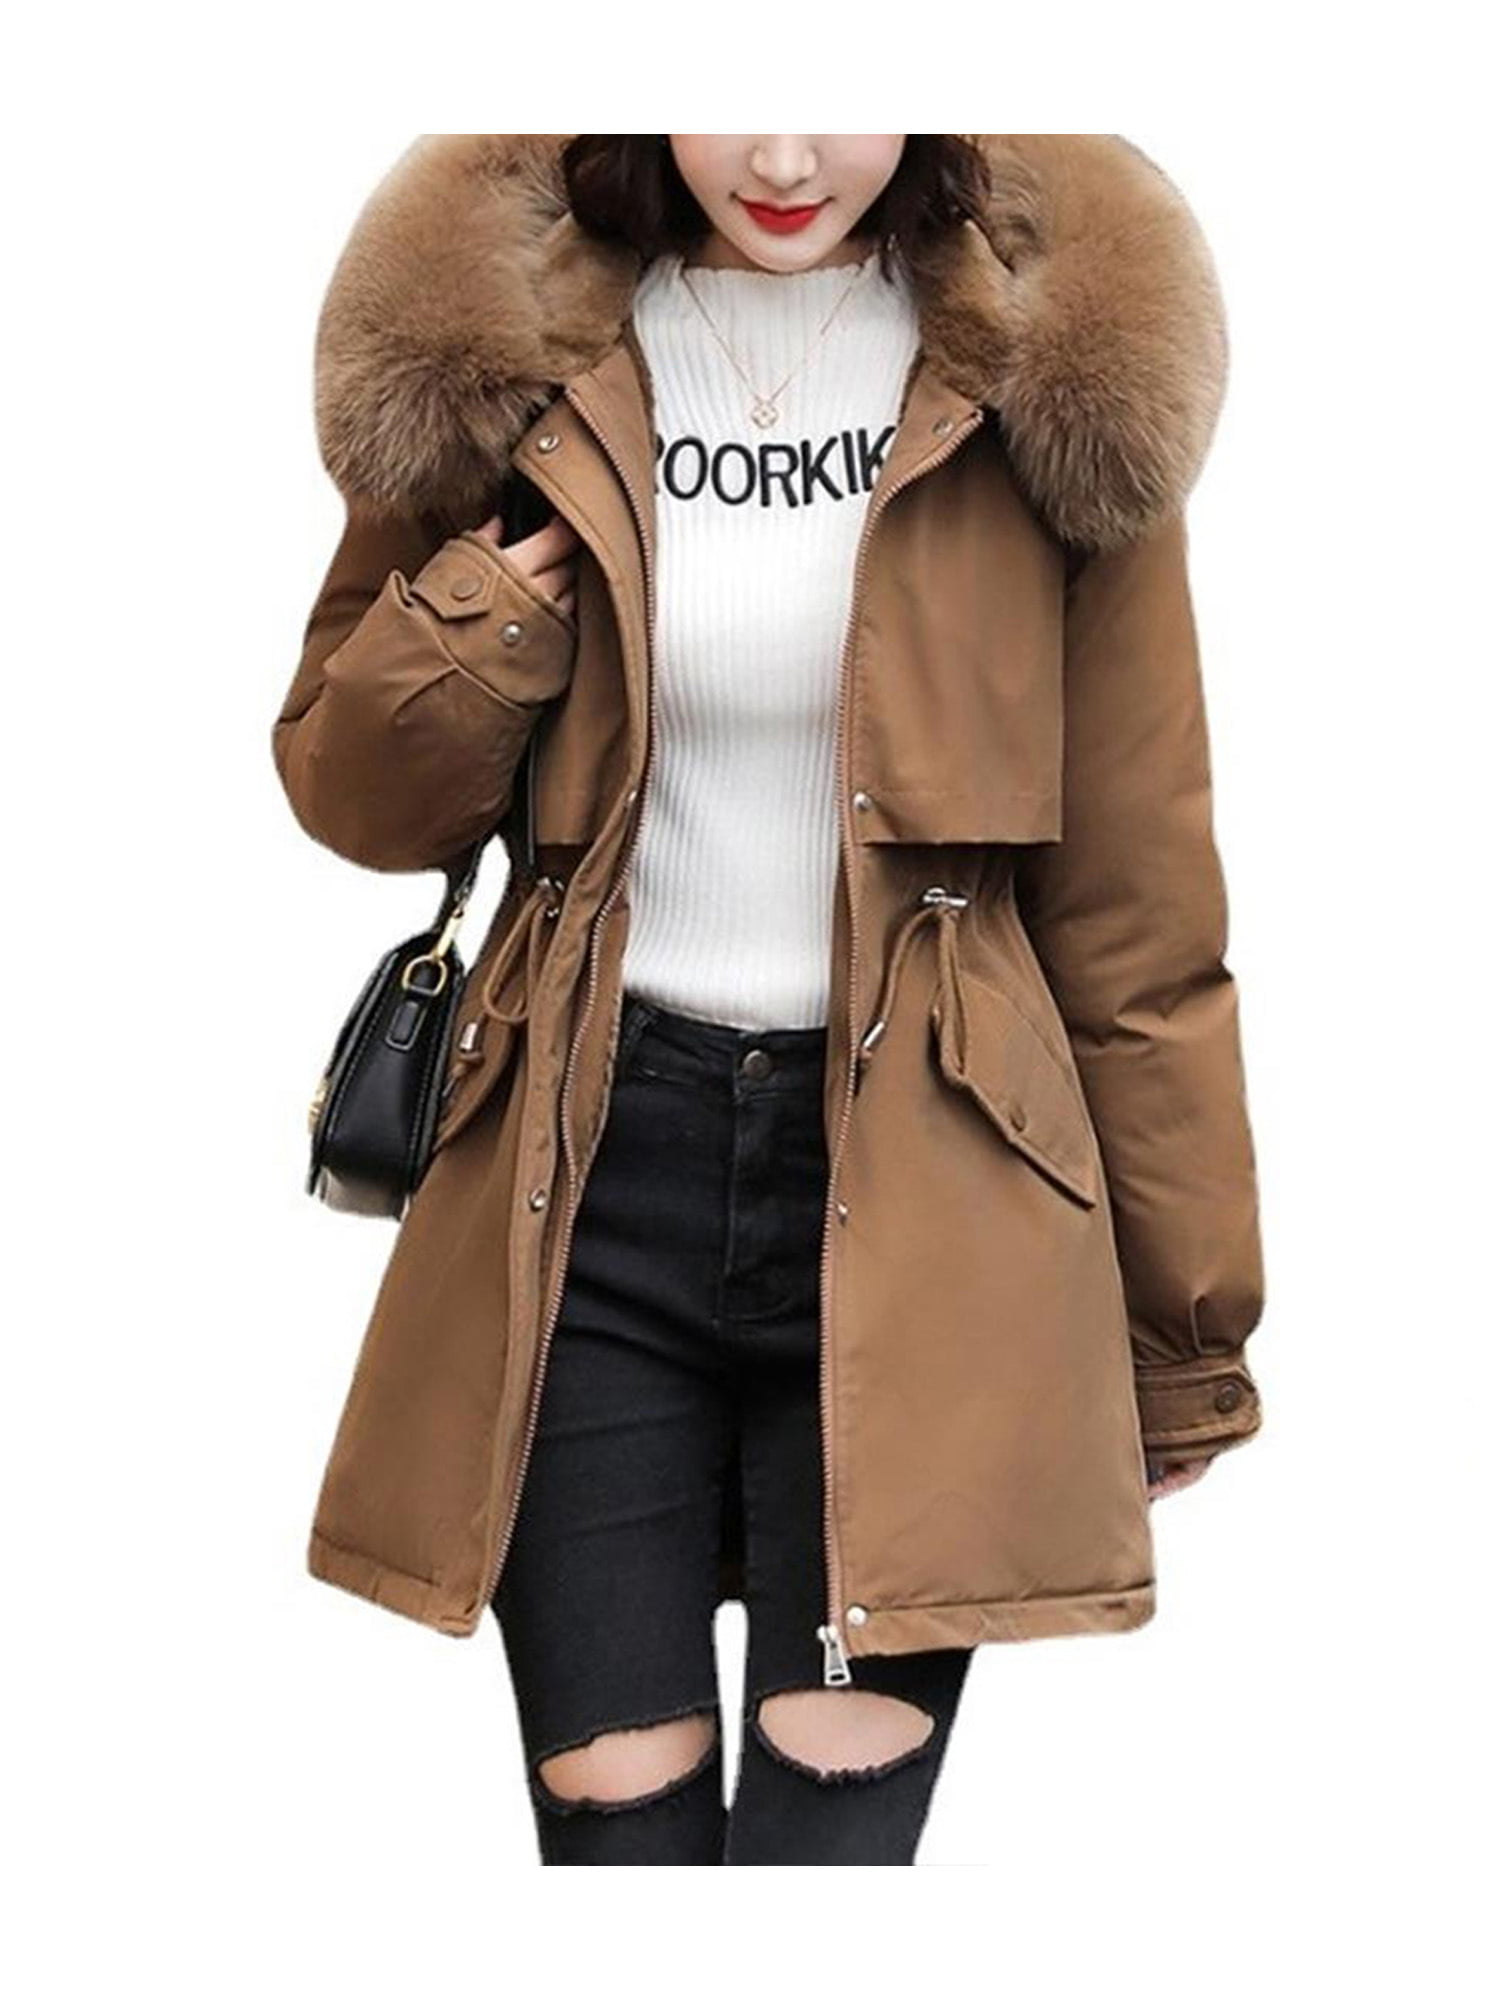 Jacket Leather Ladies Women Winter Warm Trench Parka Hooded Fur Faux Coats Tops